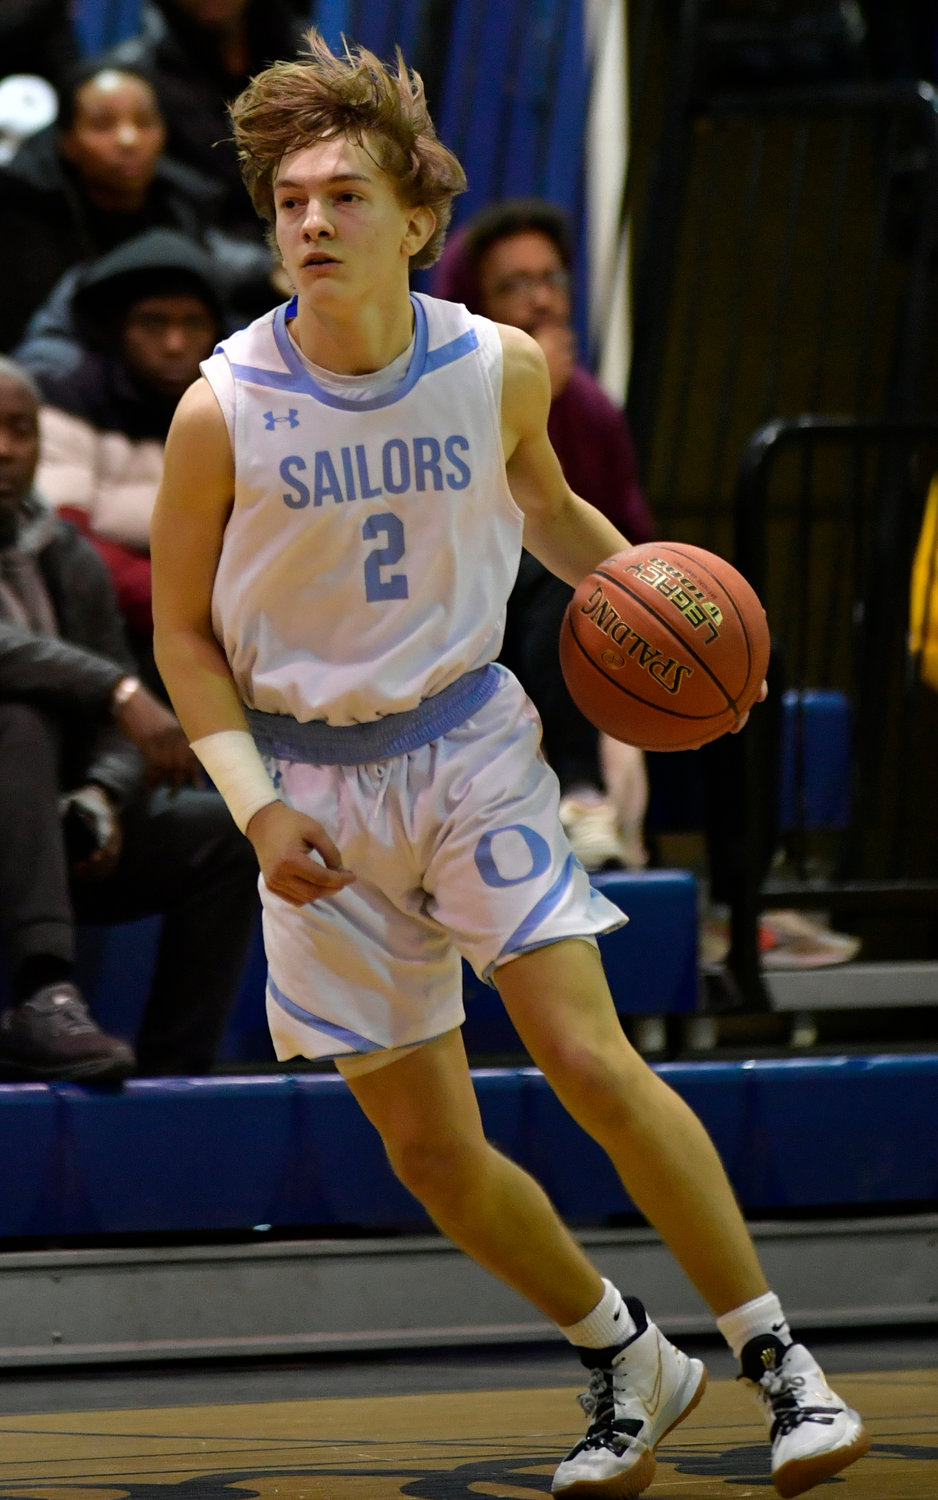 Senior guard Anthony Rodriguez poured in 25 points to lead Oceanside to a runaway victory over Herricks on Jan. 12.